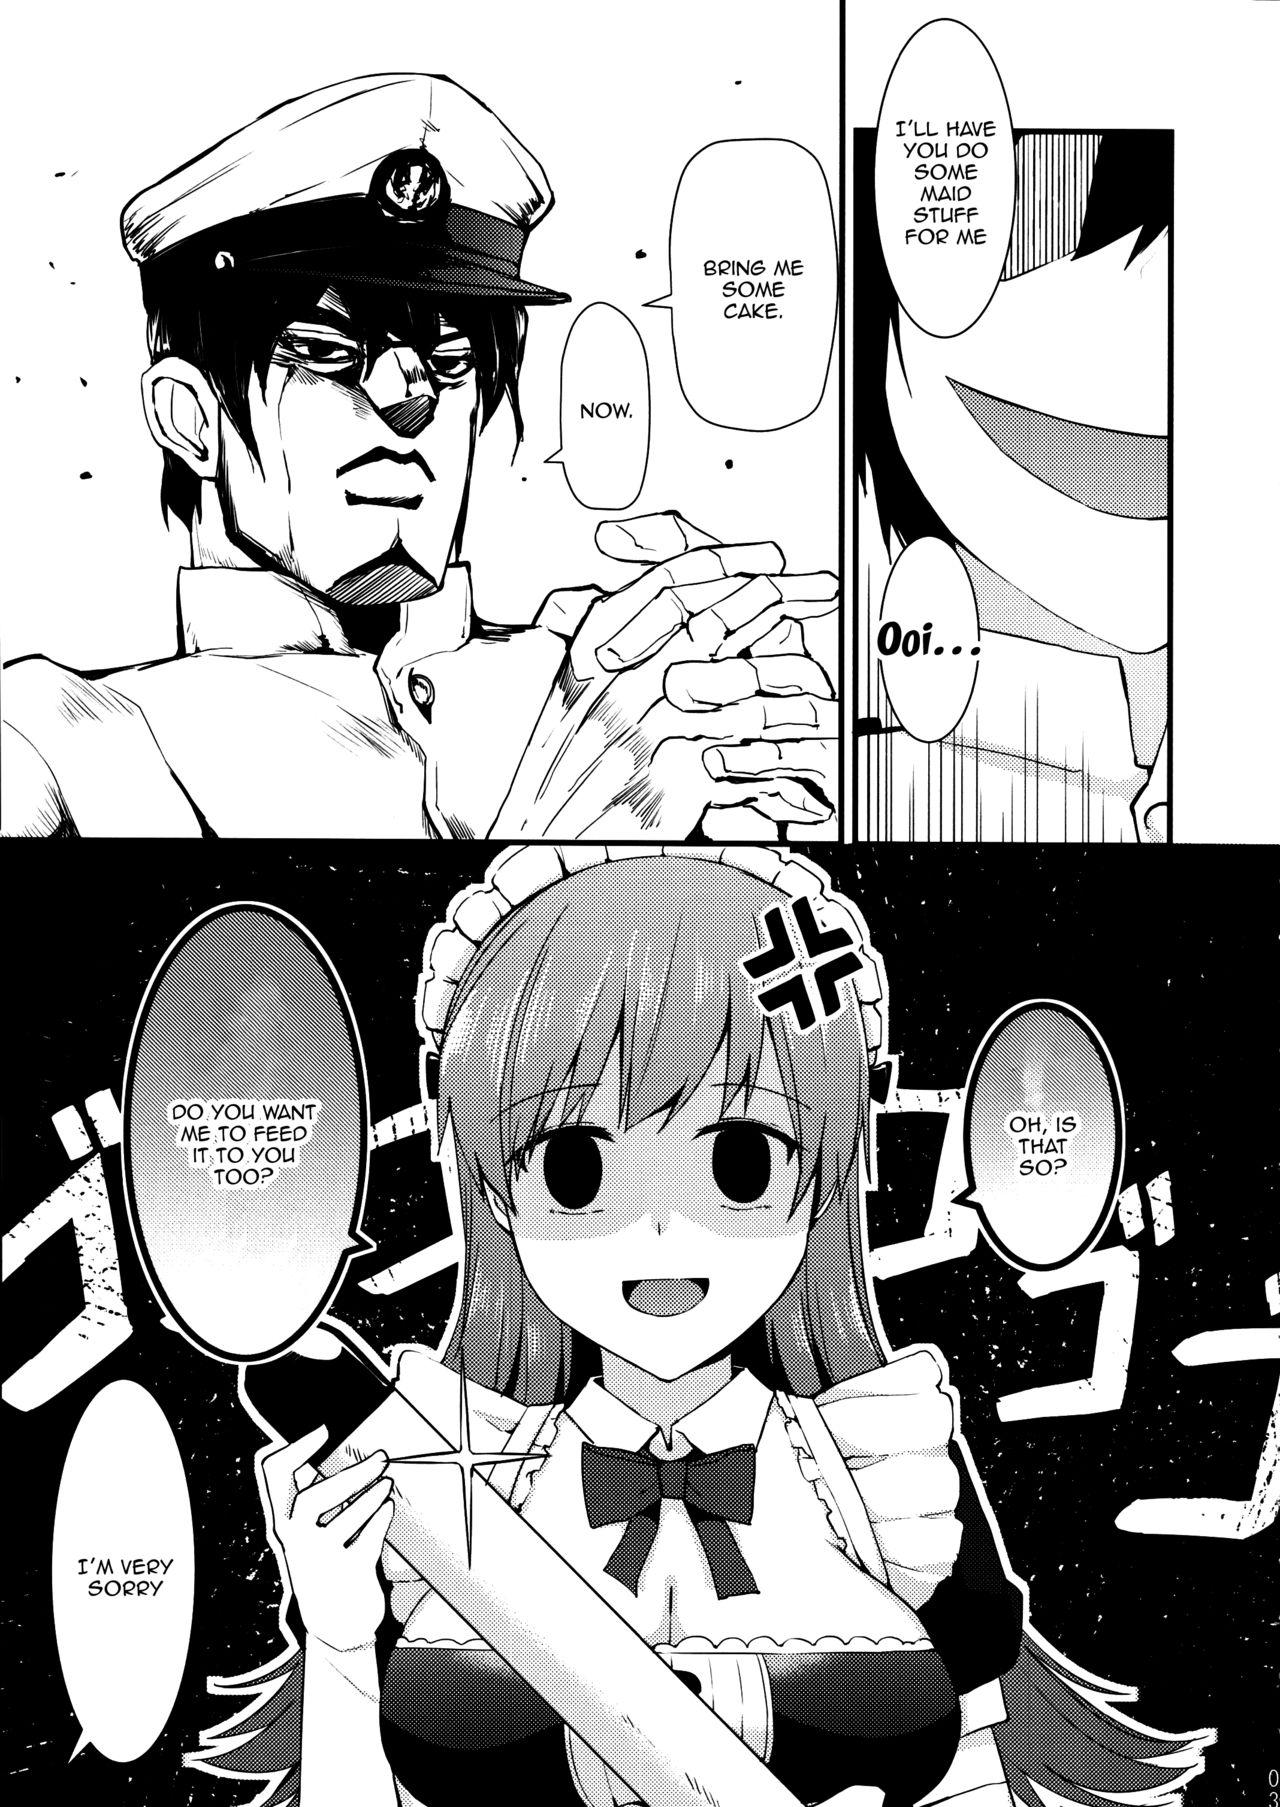 Pornstars Ooi! Maid Fuku o Kite miyou! | Ooi! Try On These Maid Clothes! - Kantai collection Monster Dick - Page 4